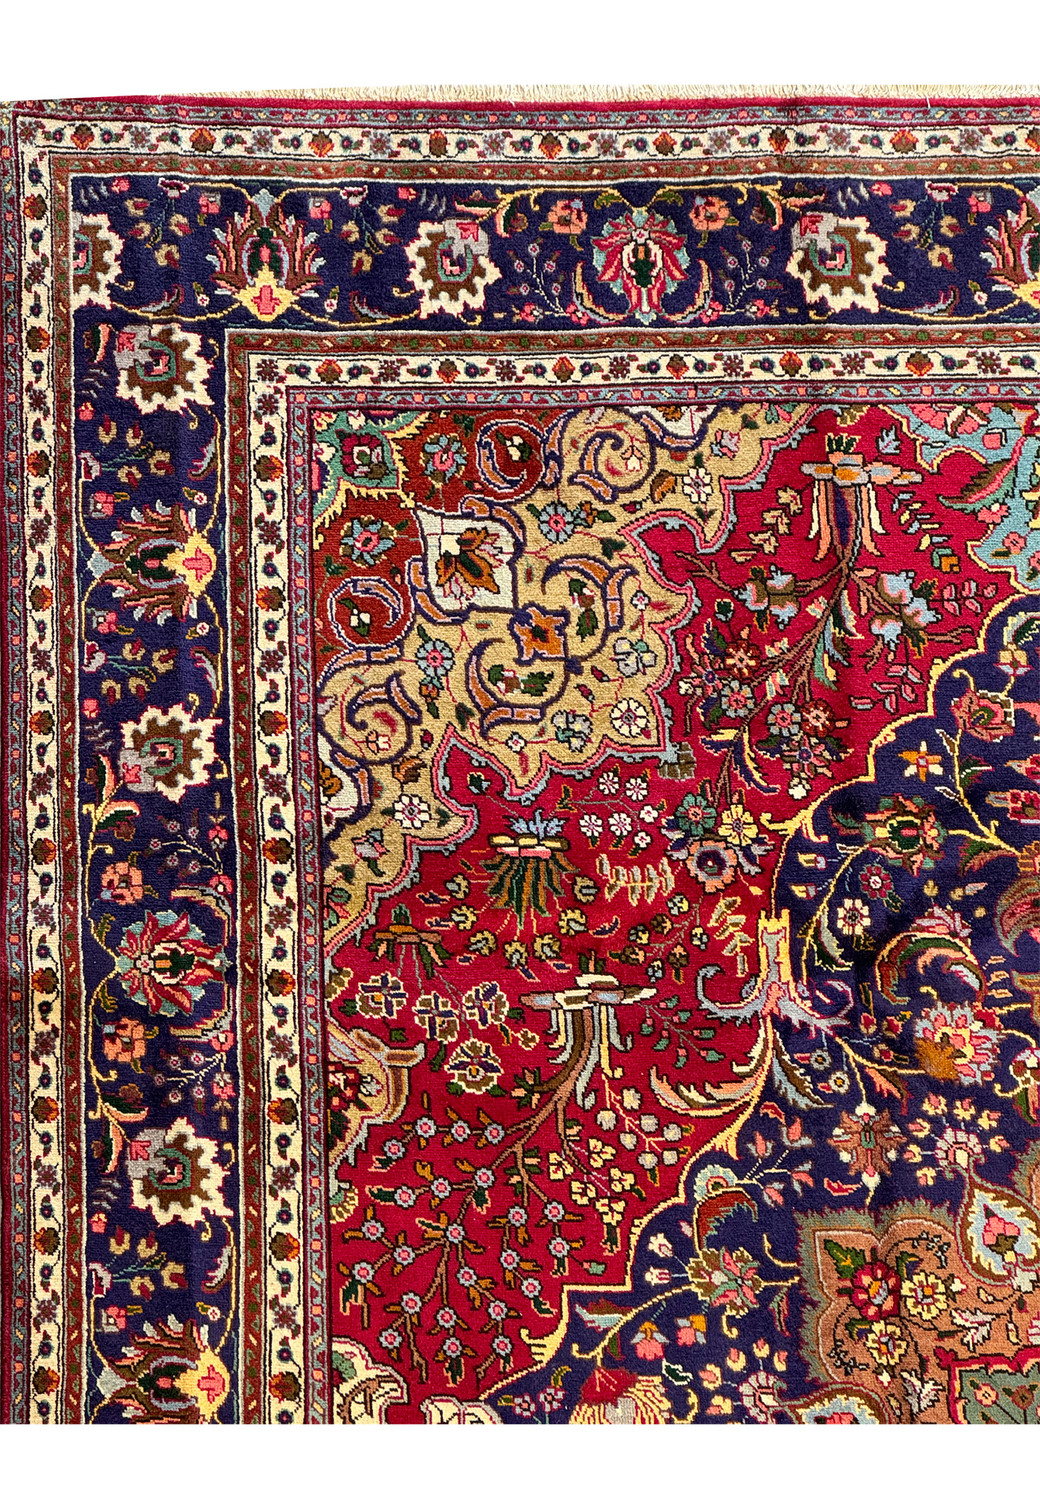 Corner section of the Persian Geometric Tabriz Rug displaying the intersection of the main field's floral design with the ornate border patterns